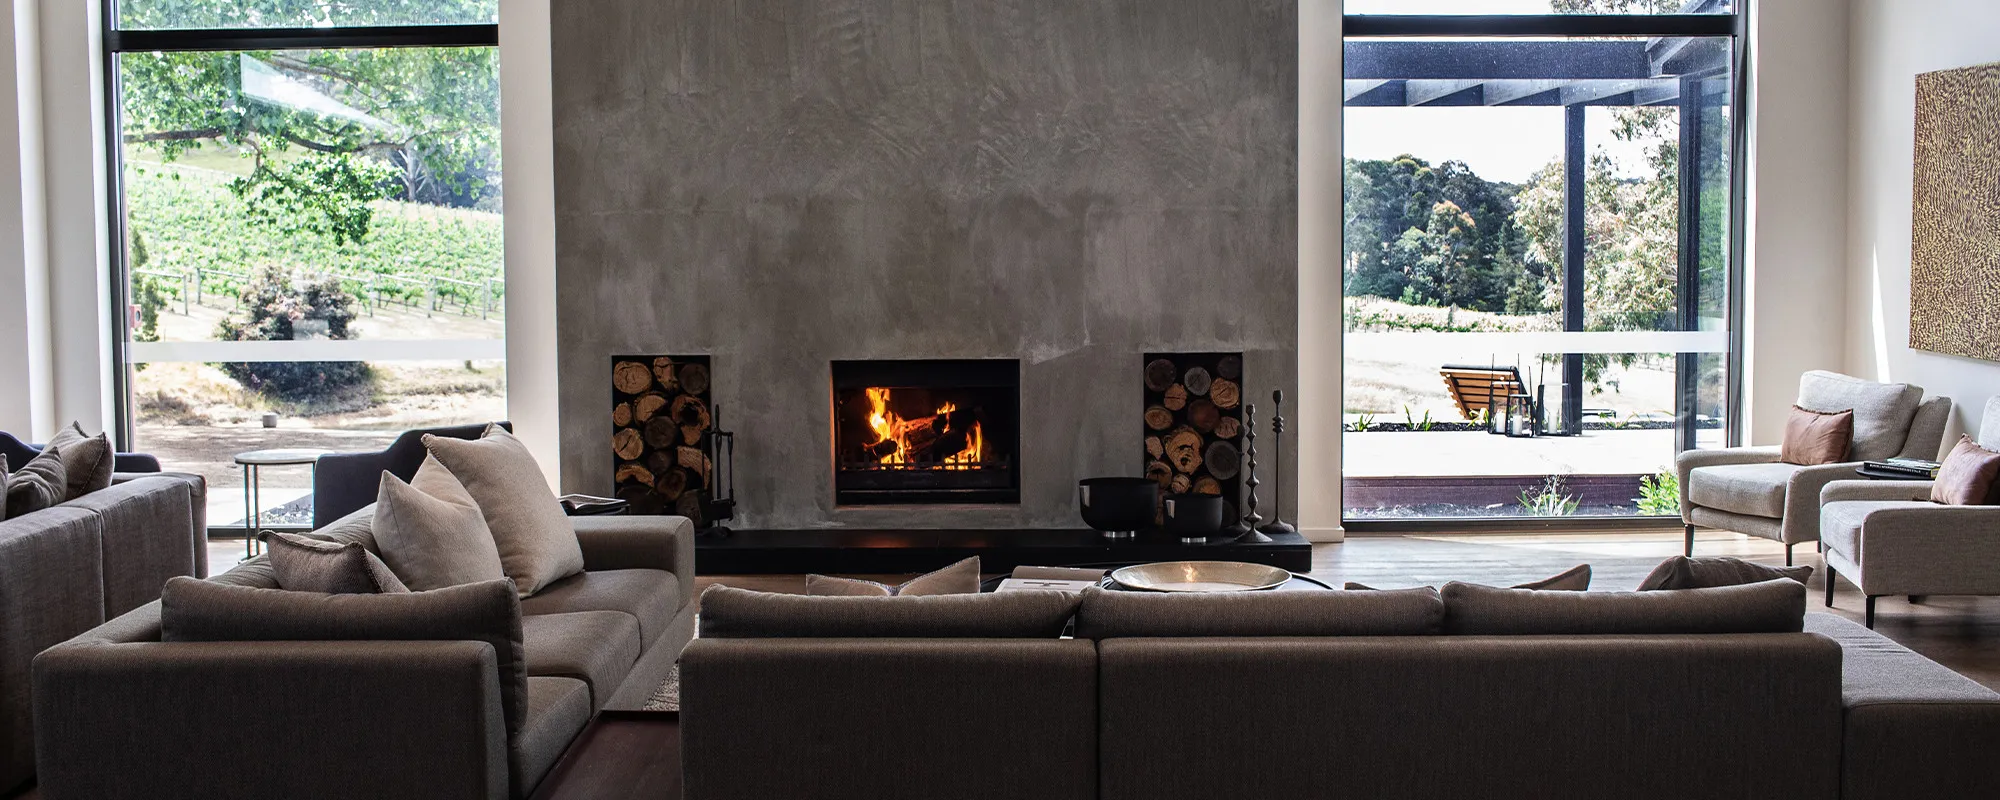 Lancemore Macedon Ranges Boutique Luxury Accommodation Gallery Common Area 2000x800 v2